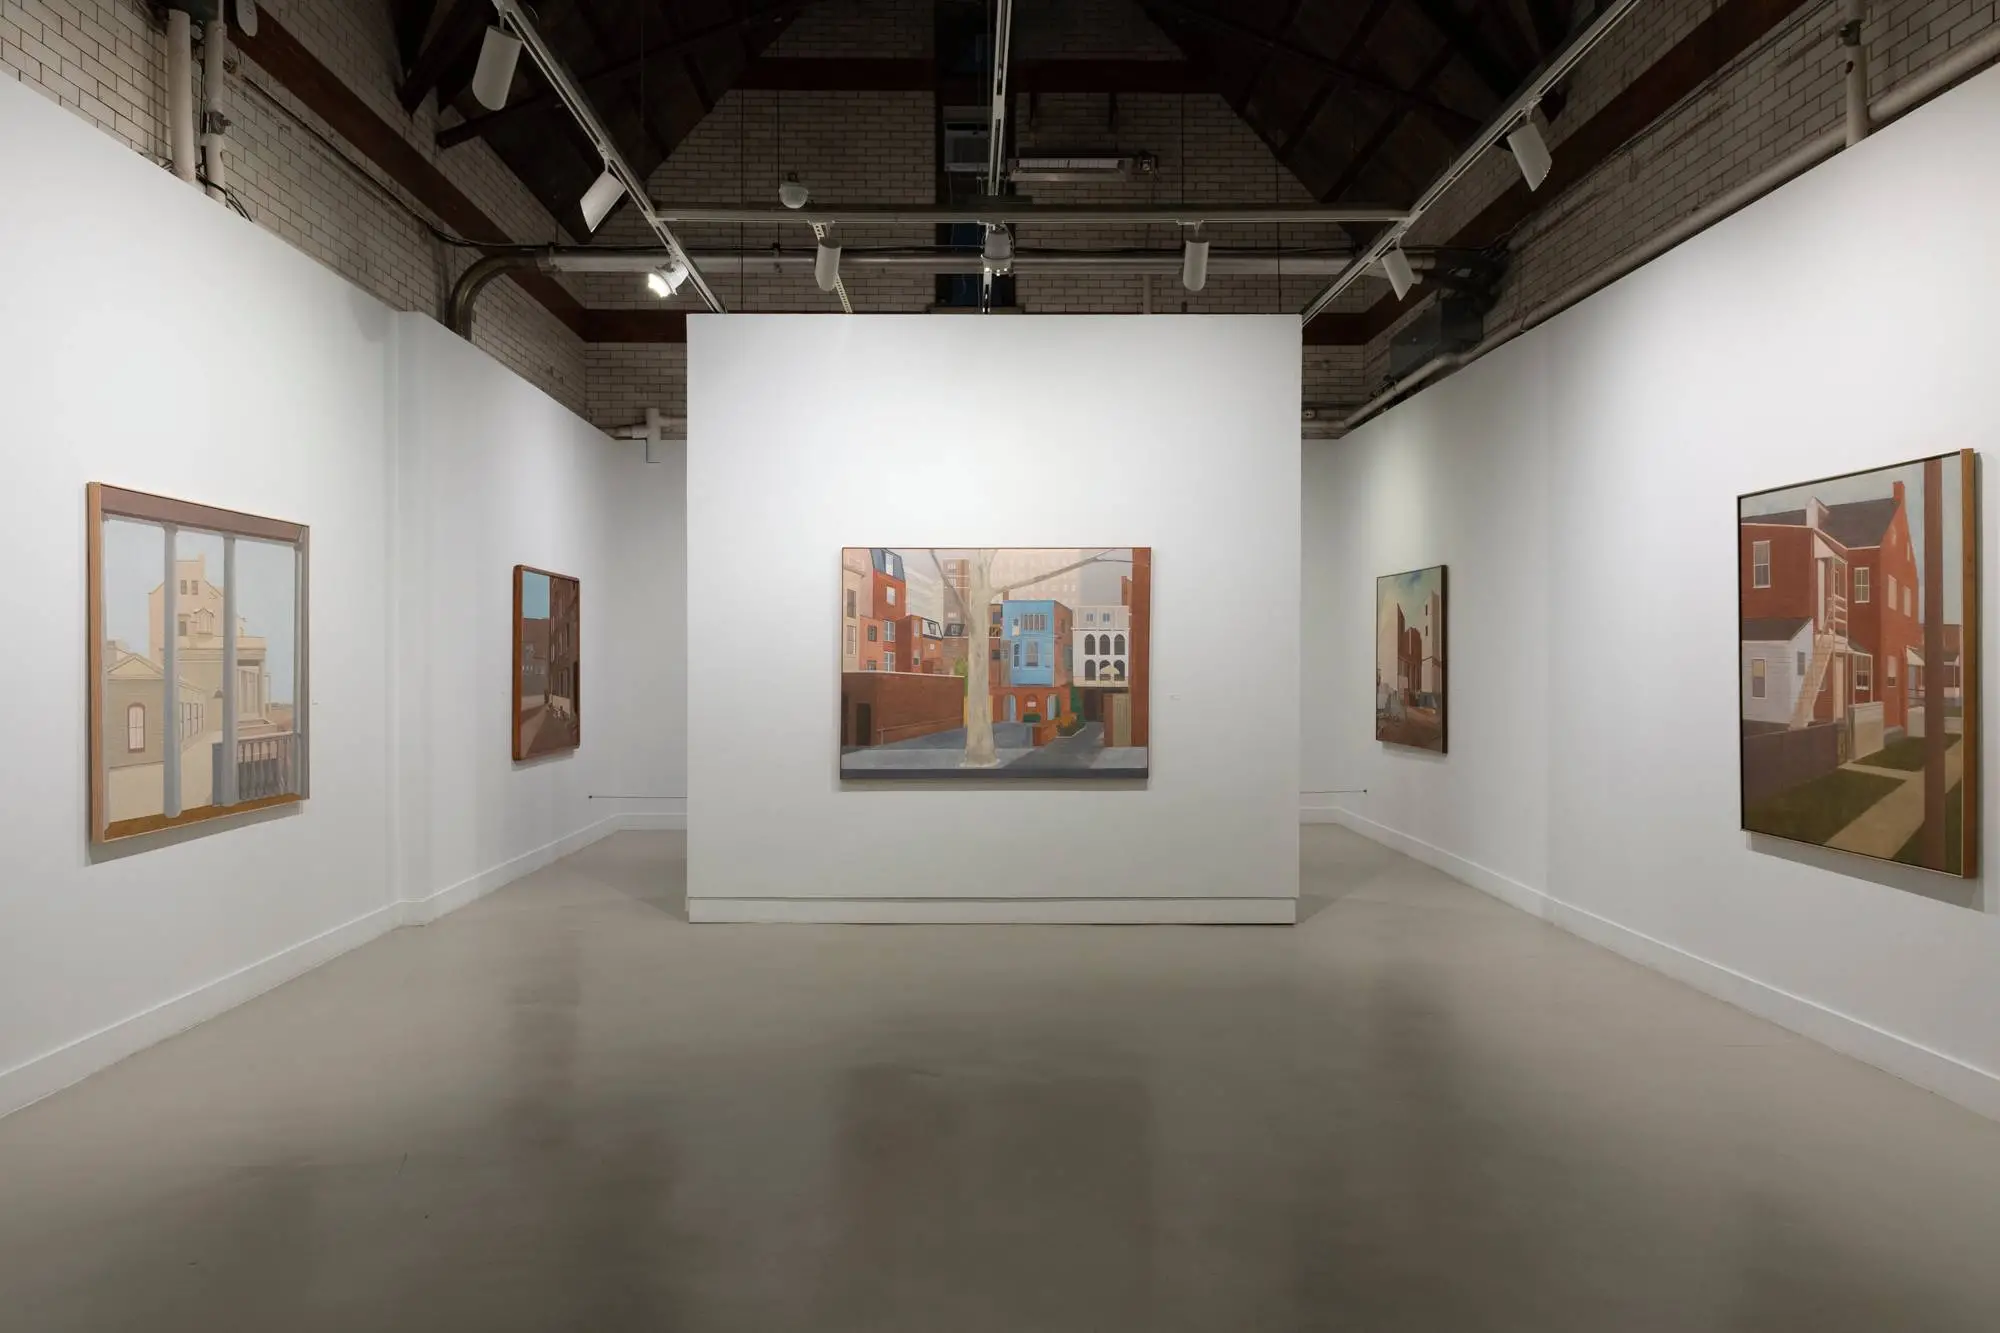 installation view from "Larry Day: Absent Presence"